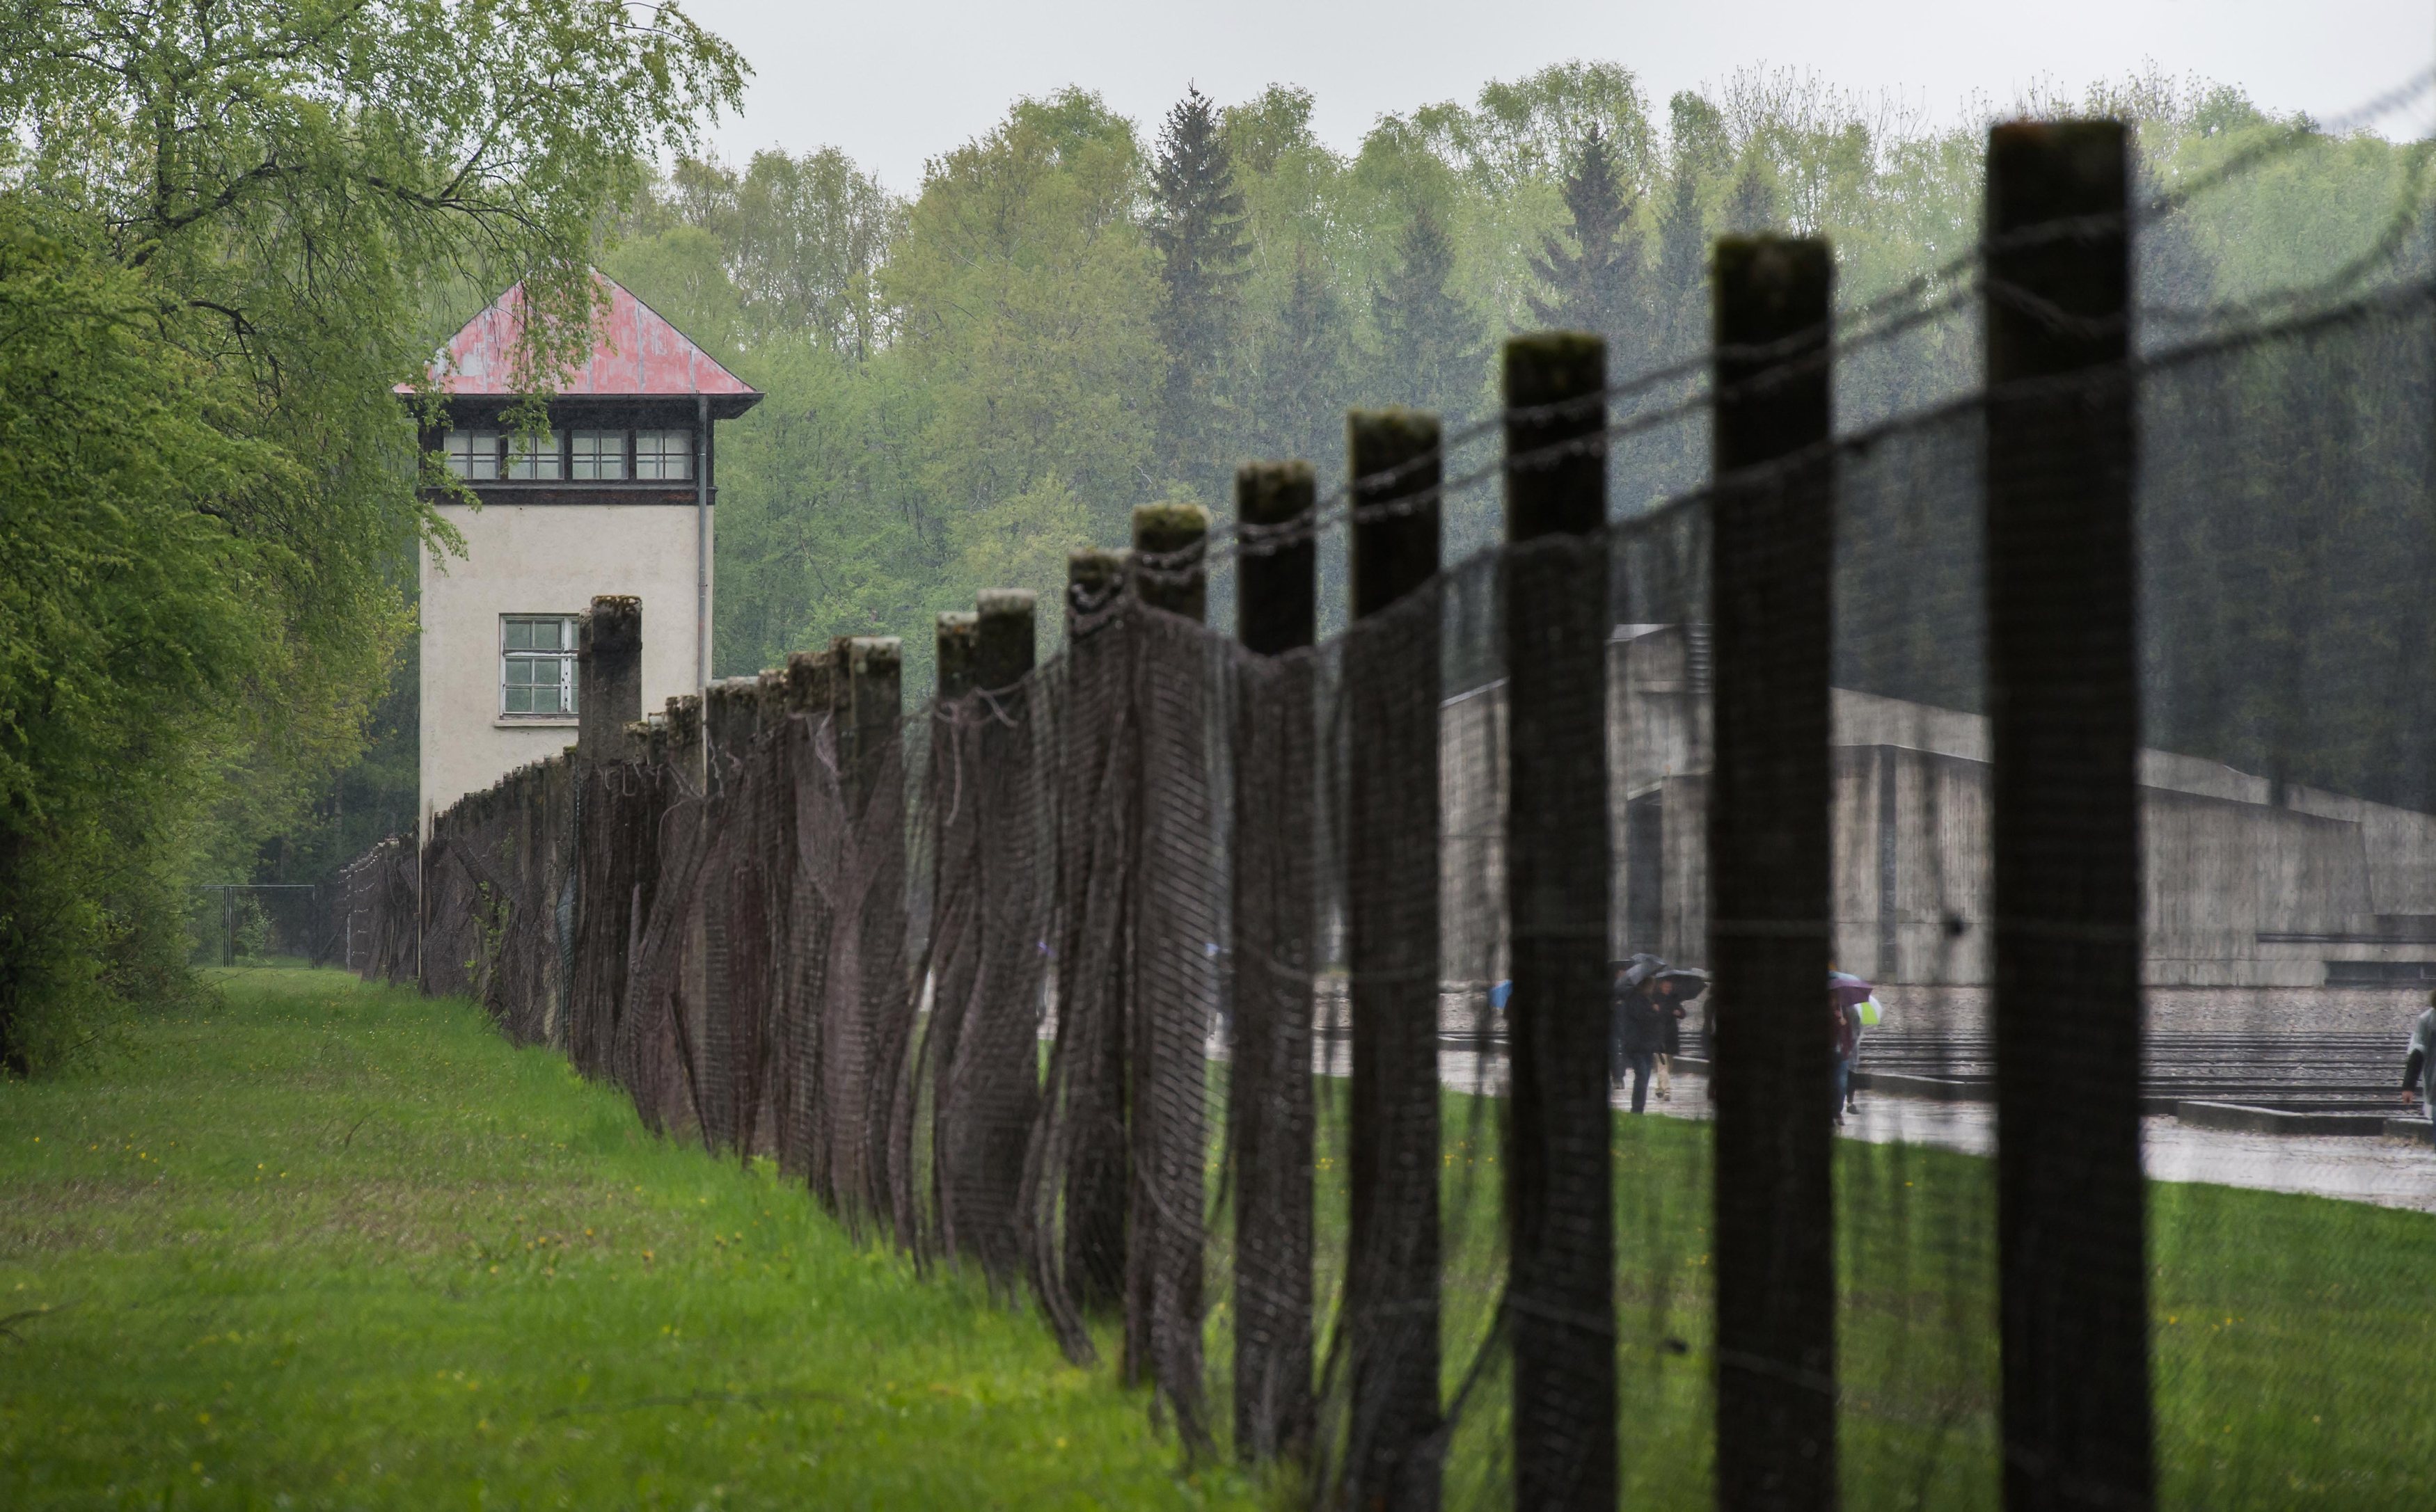 70th Anniversary Of The Liberation Of The Dachau Concentration Camp